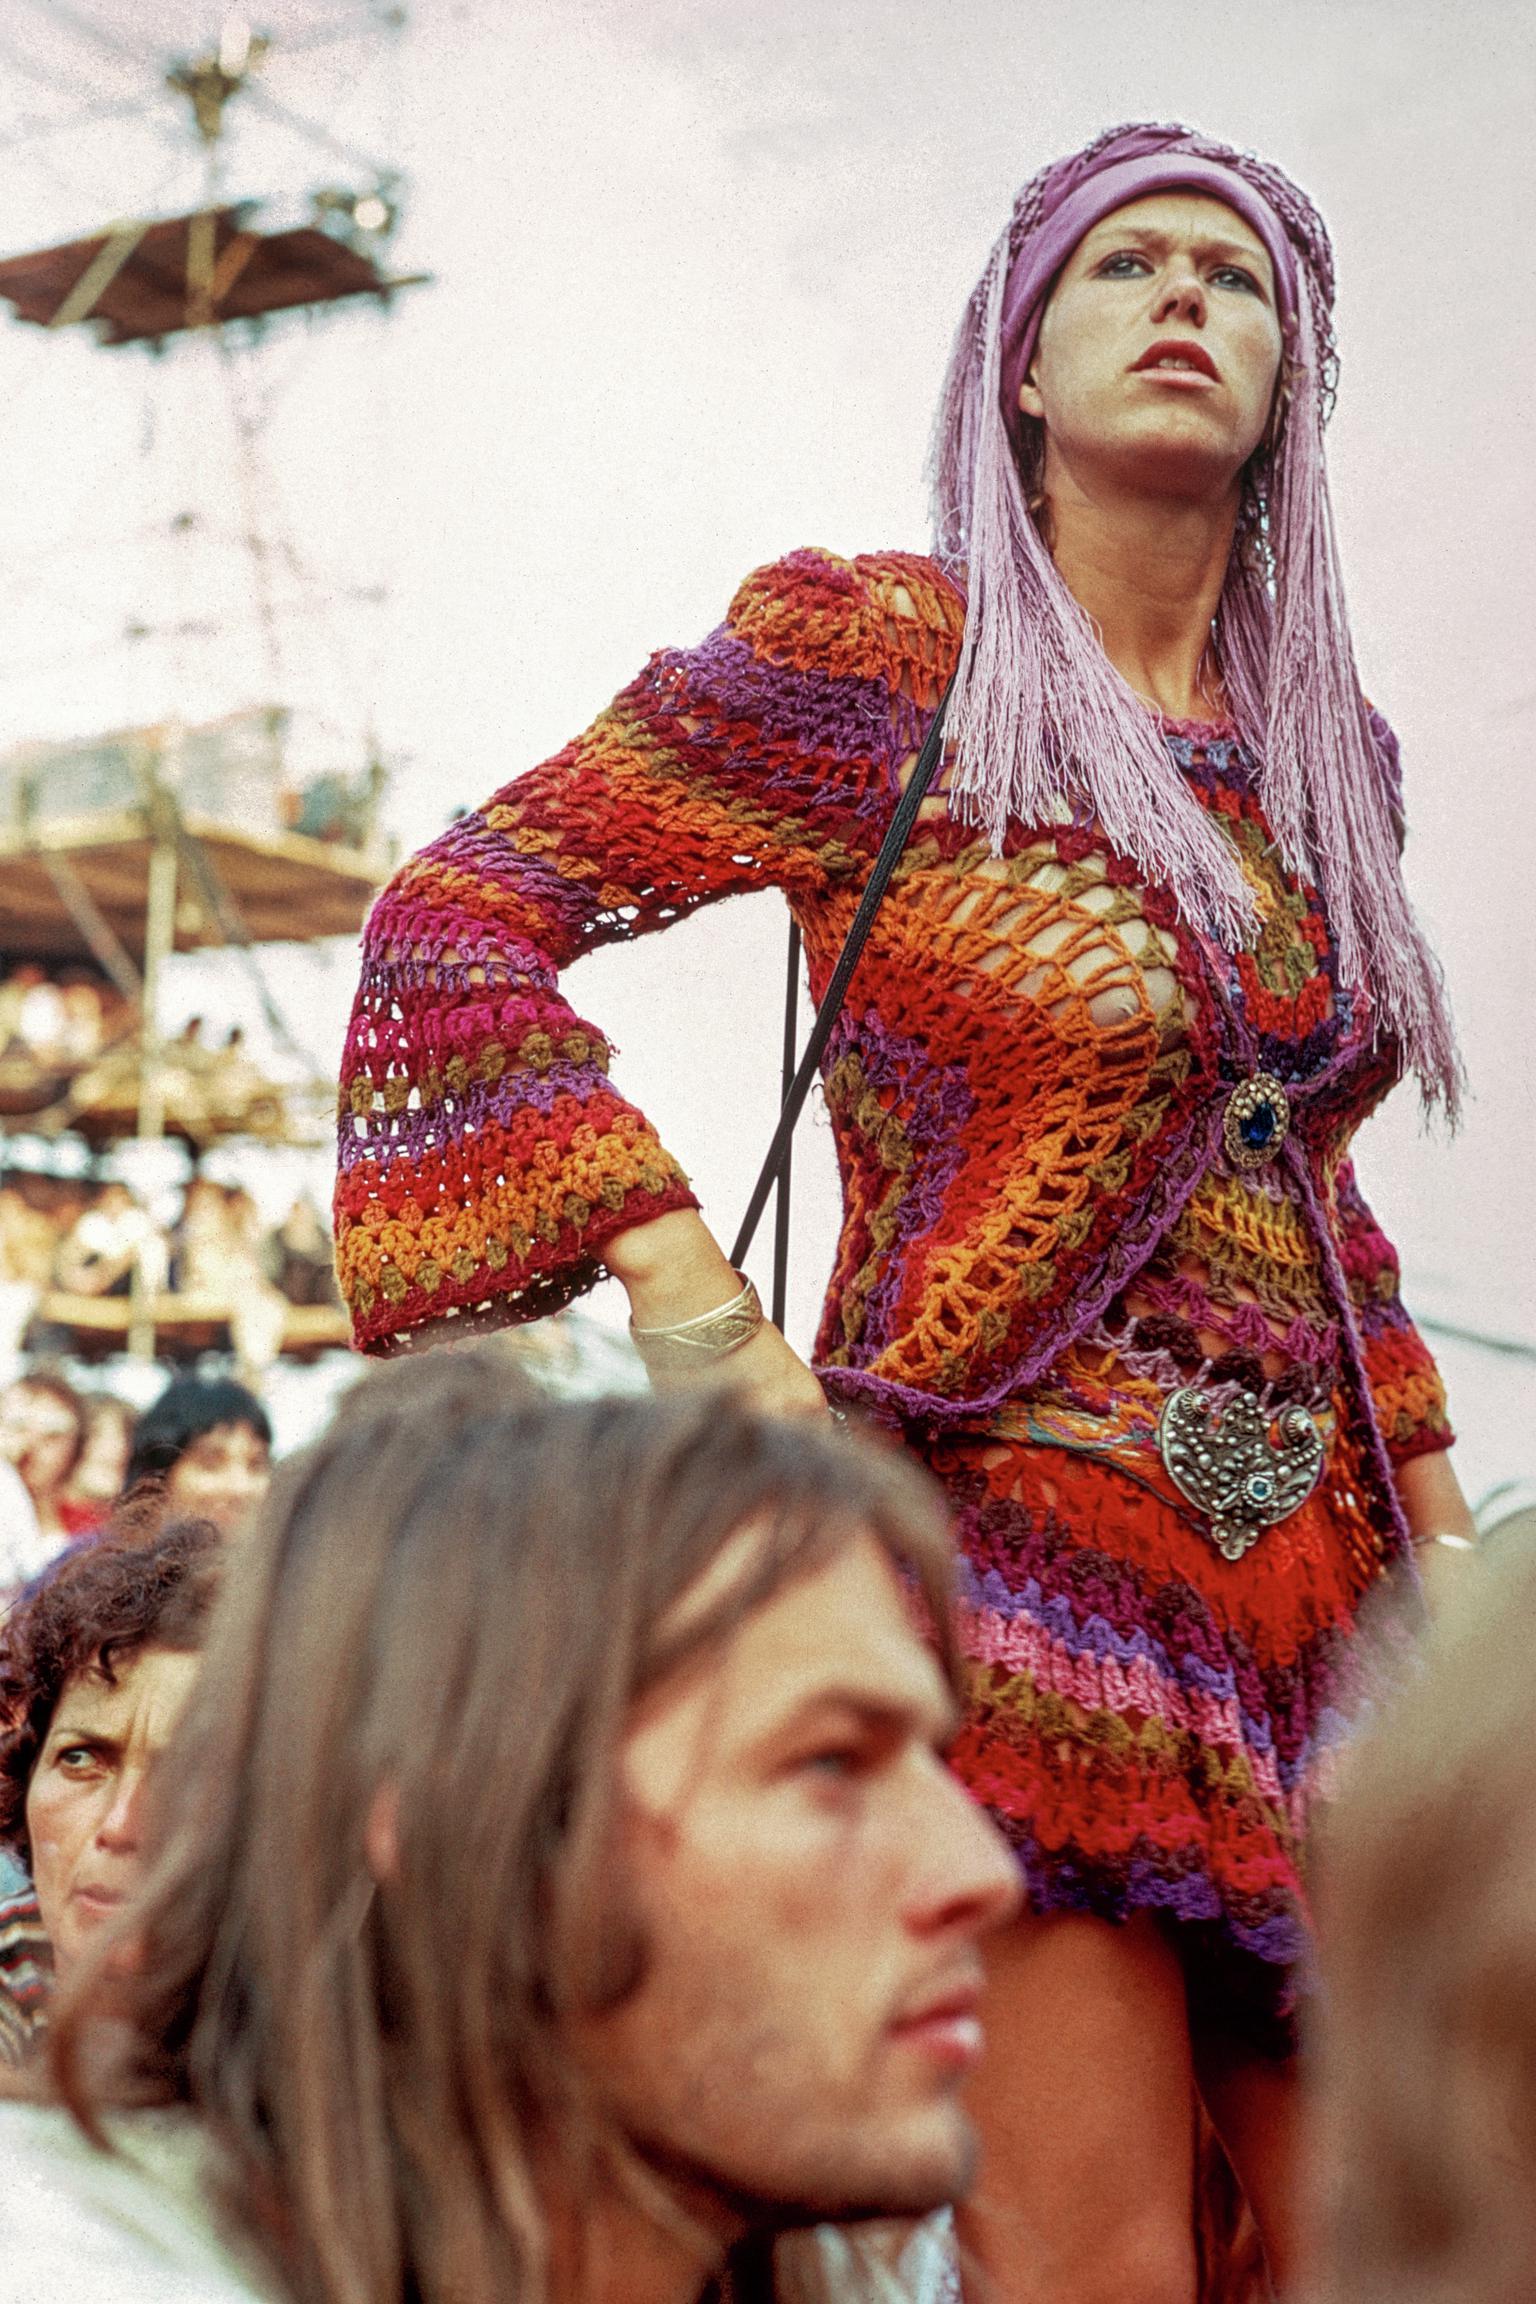 Isle of Wight Festival. Pop festivals bring out the wildest forms of dress sense